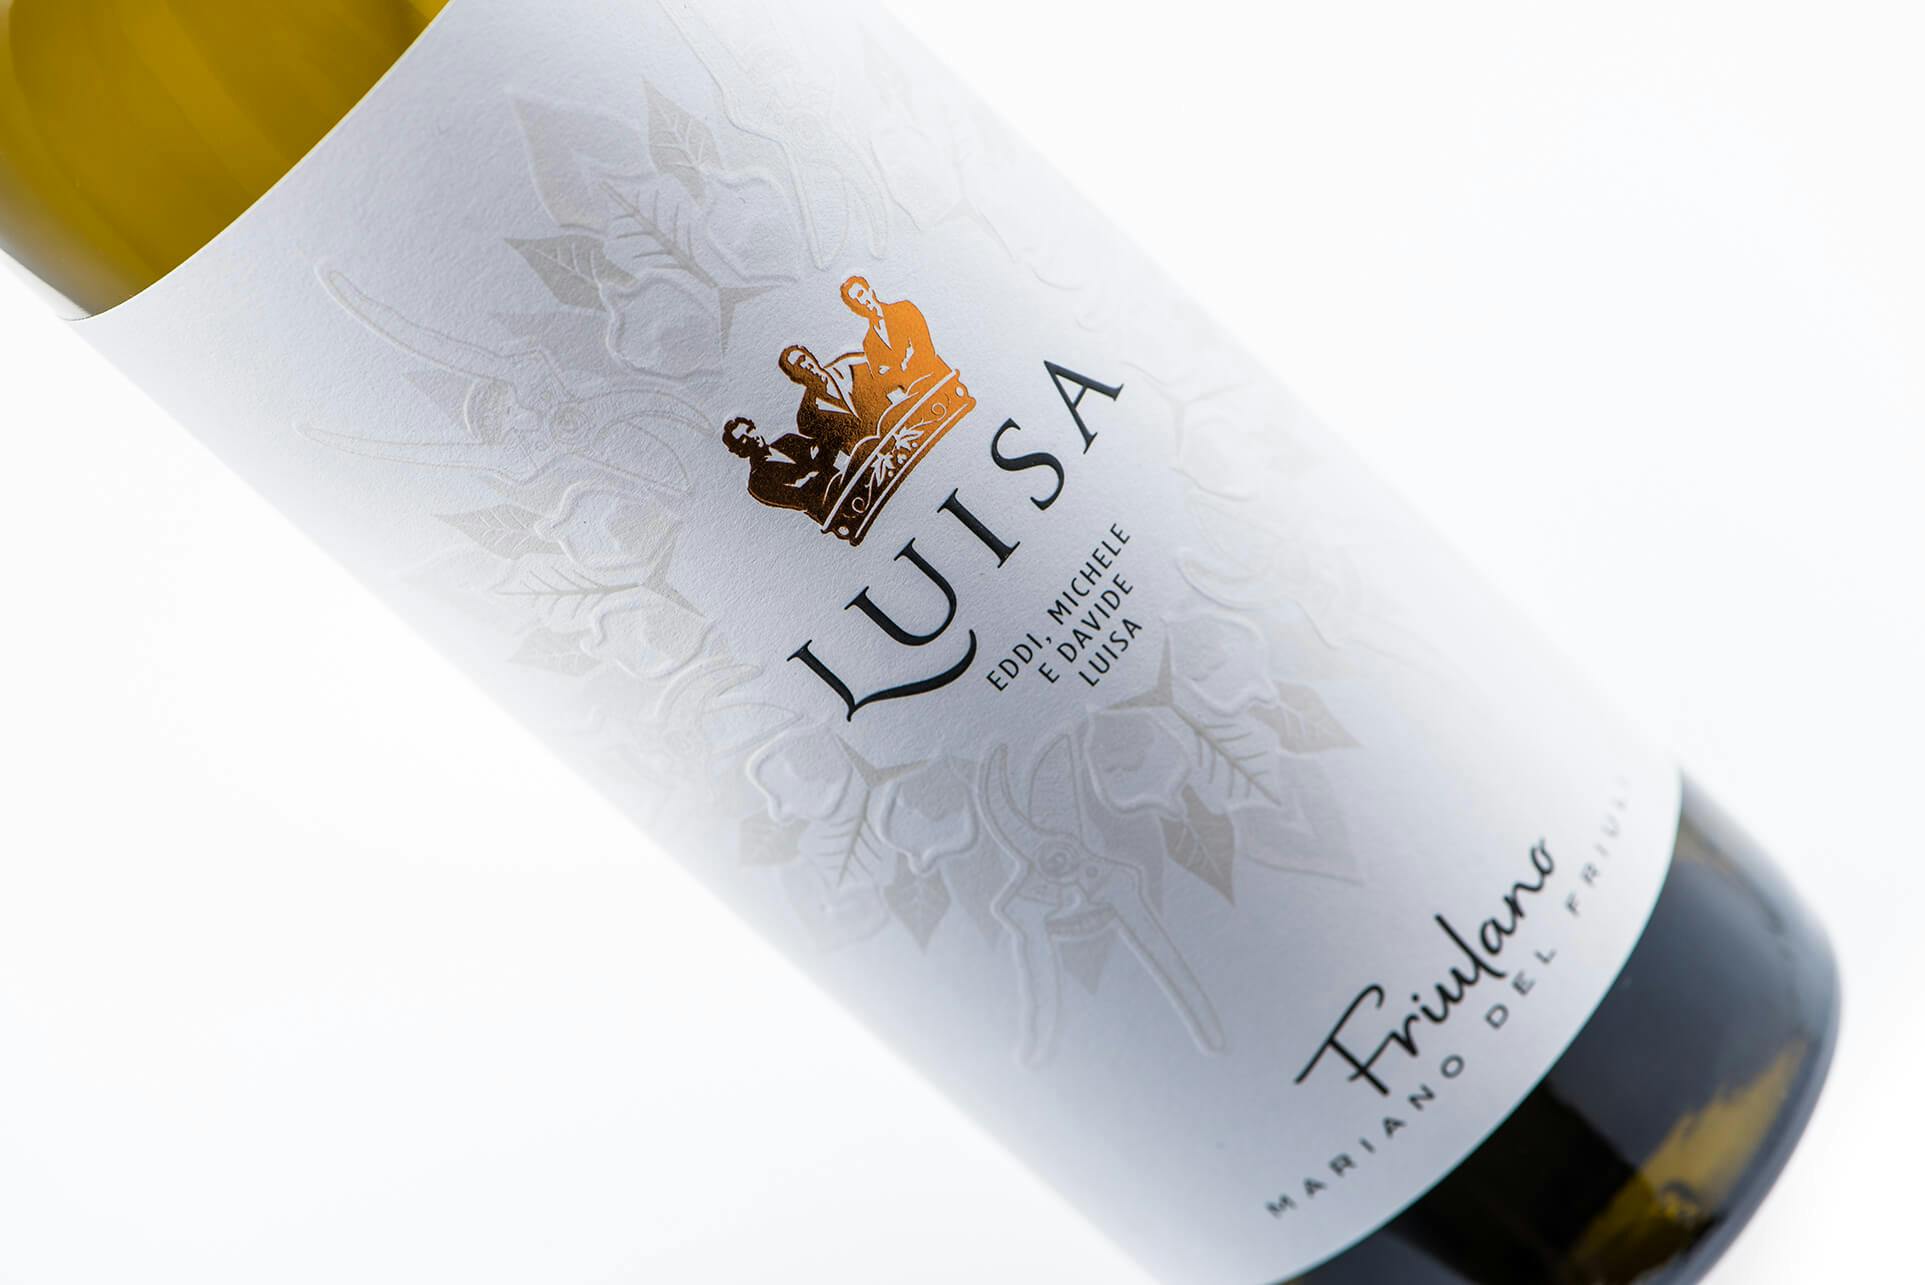 Render of a white wine bottle of Luisa wine, with our new branded label